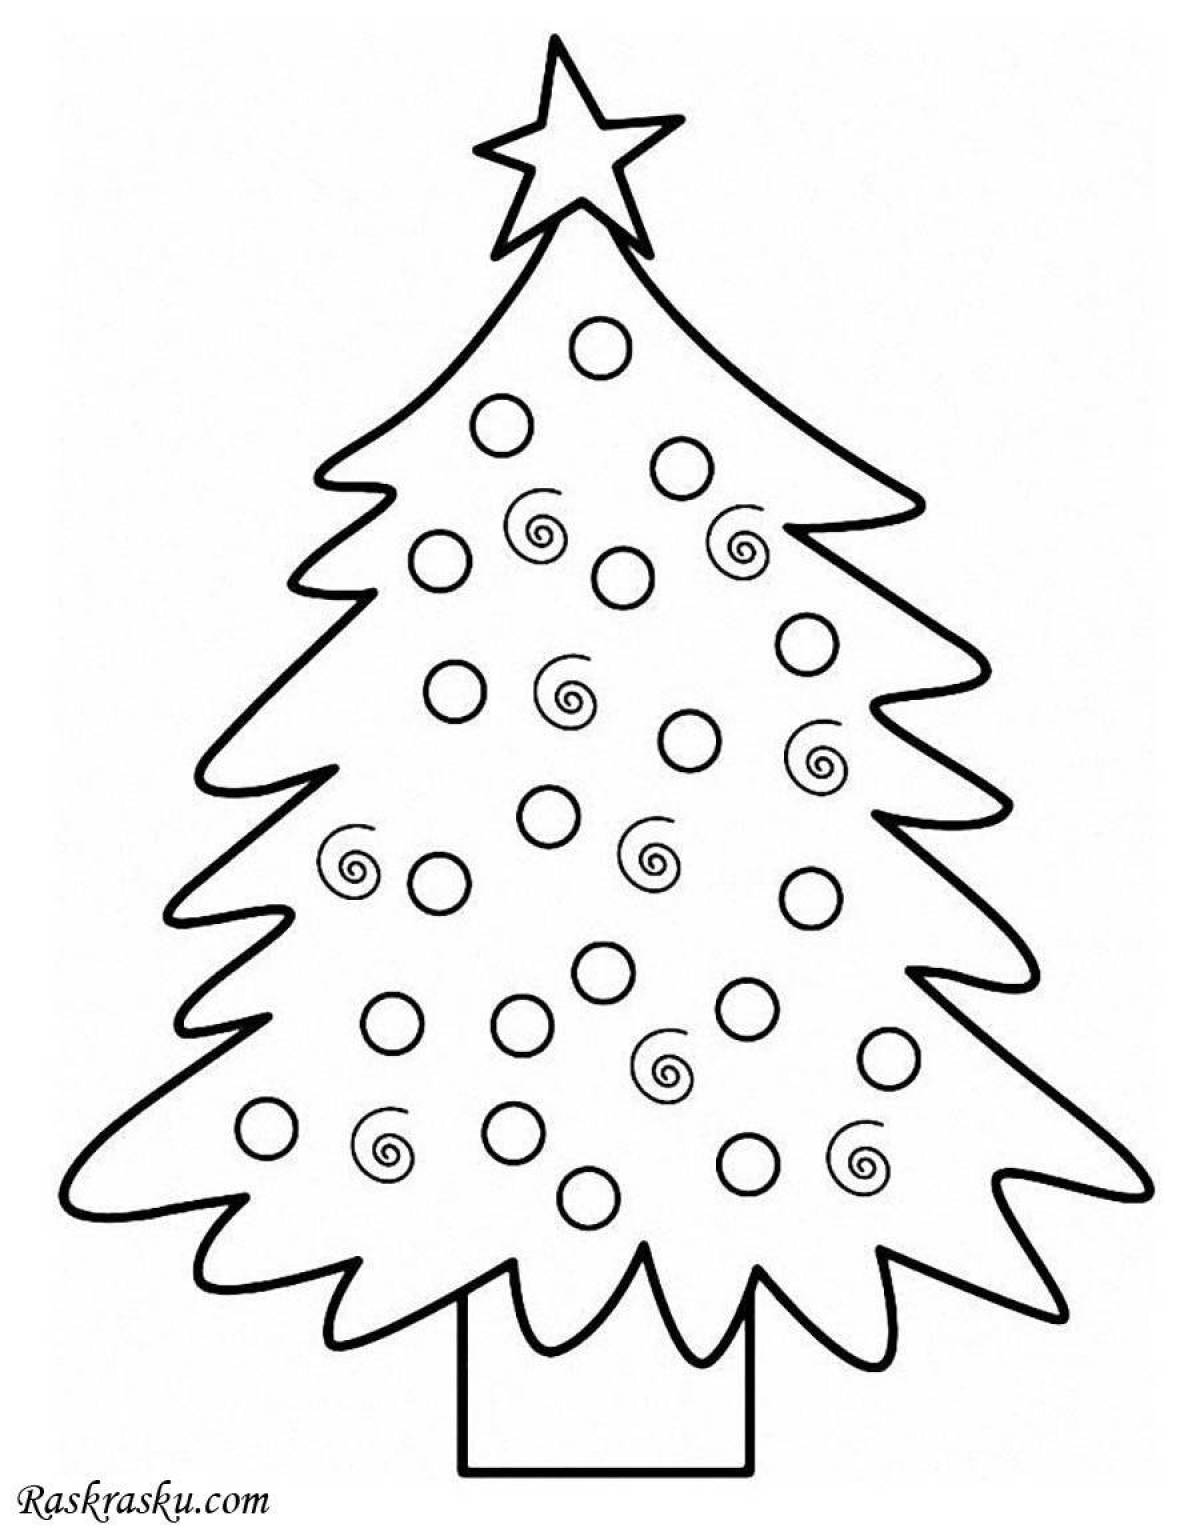 Merry Christmas tree coloring book for 3-4 year olds